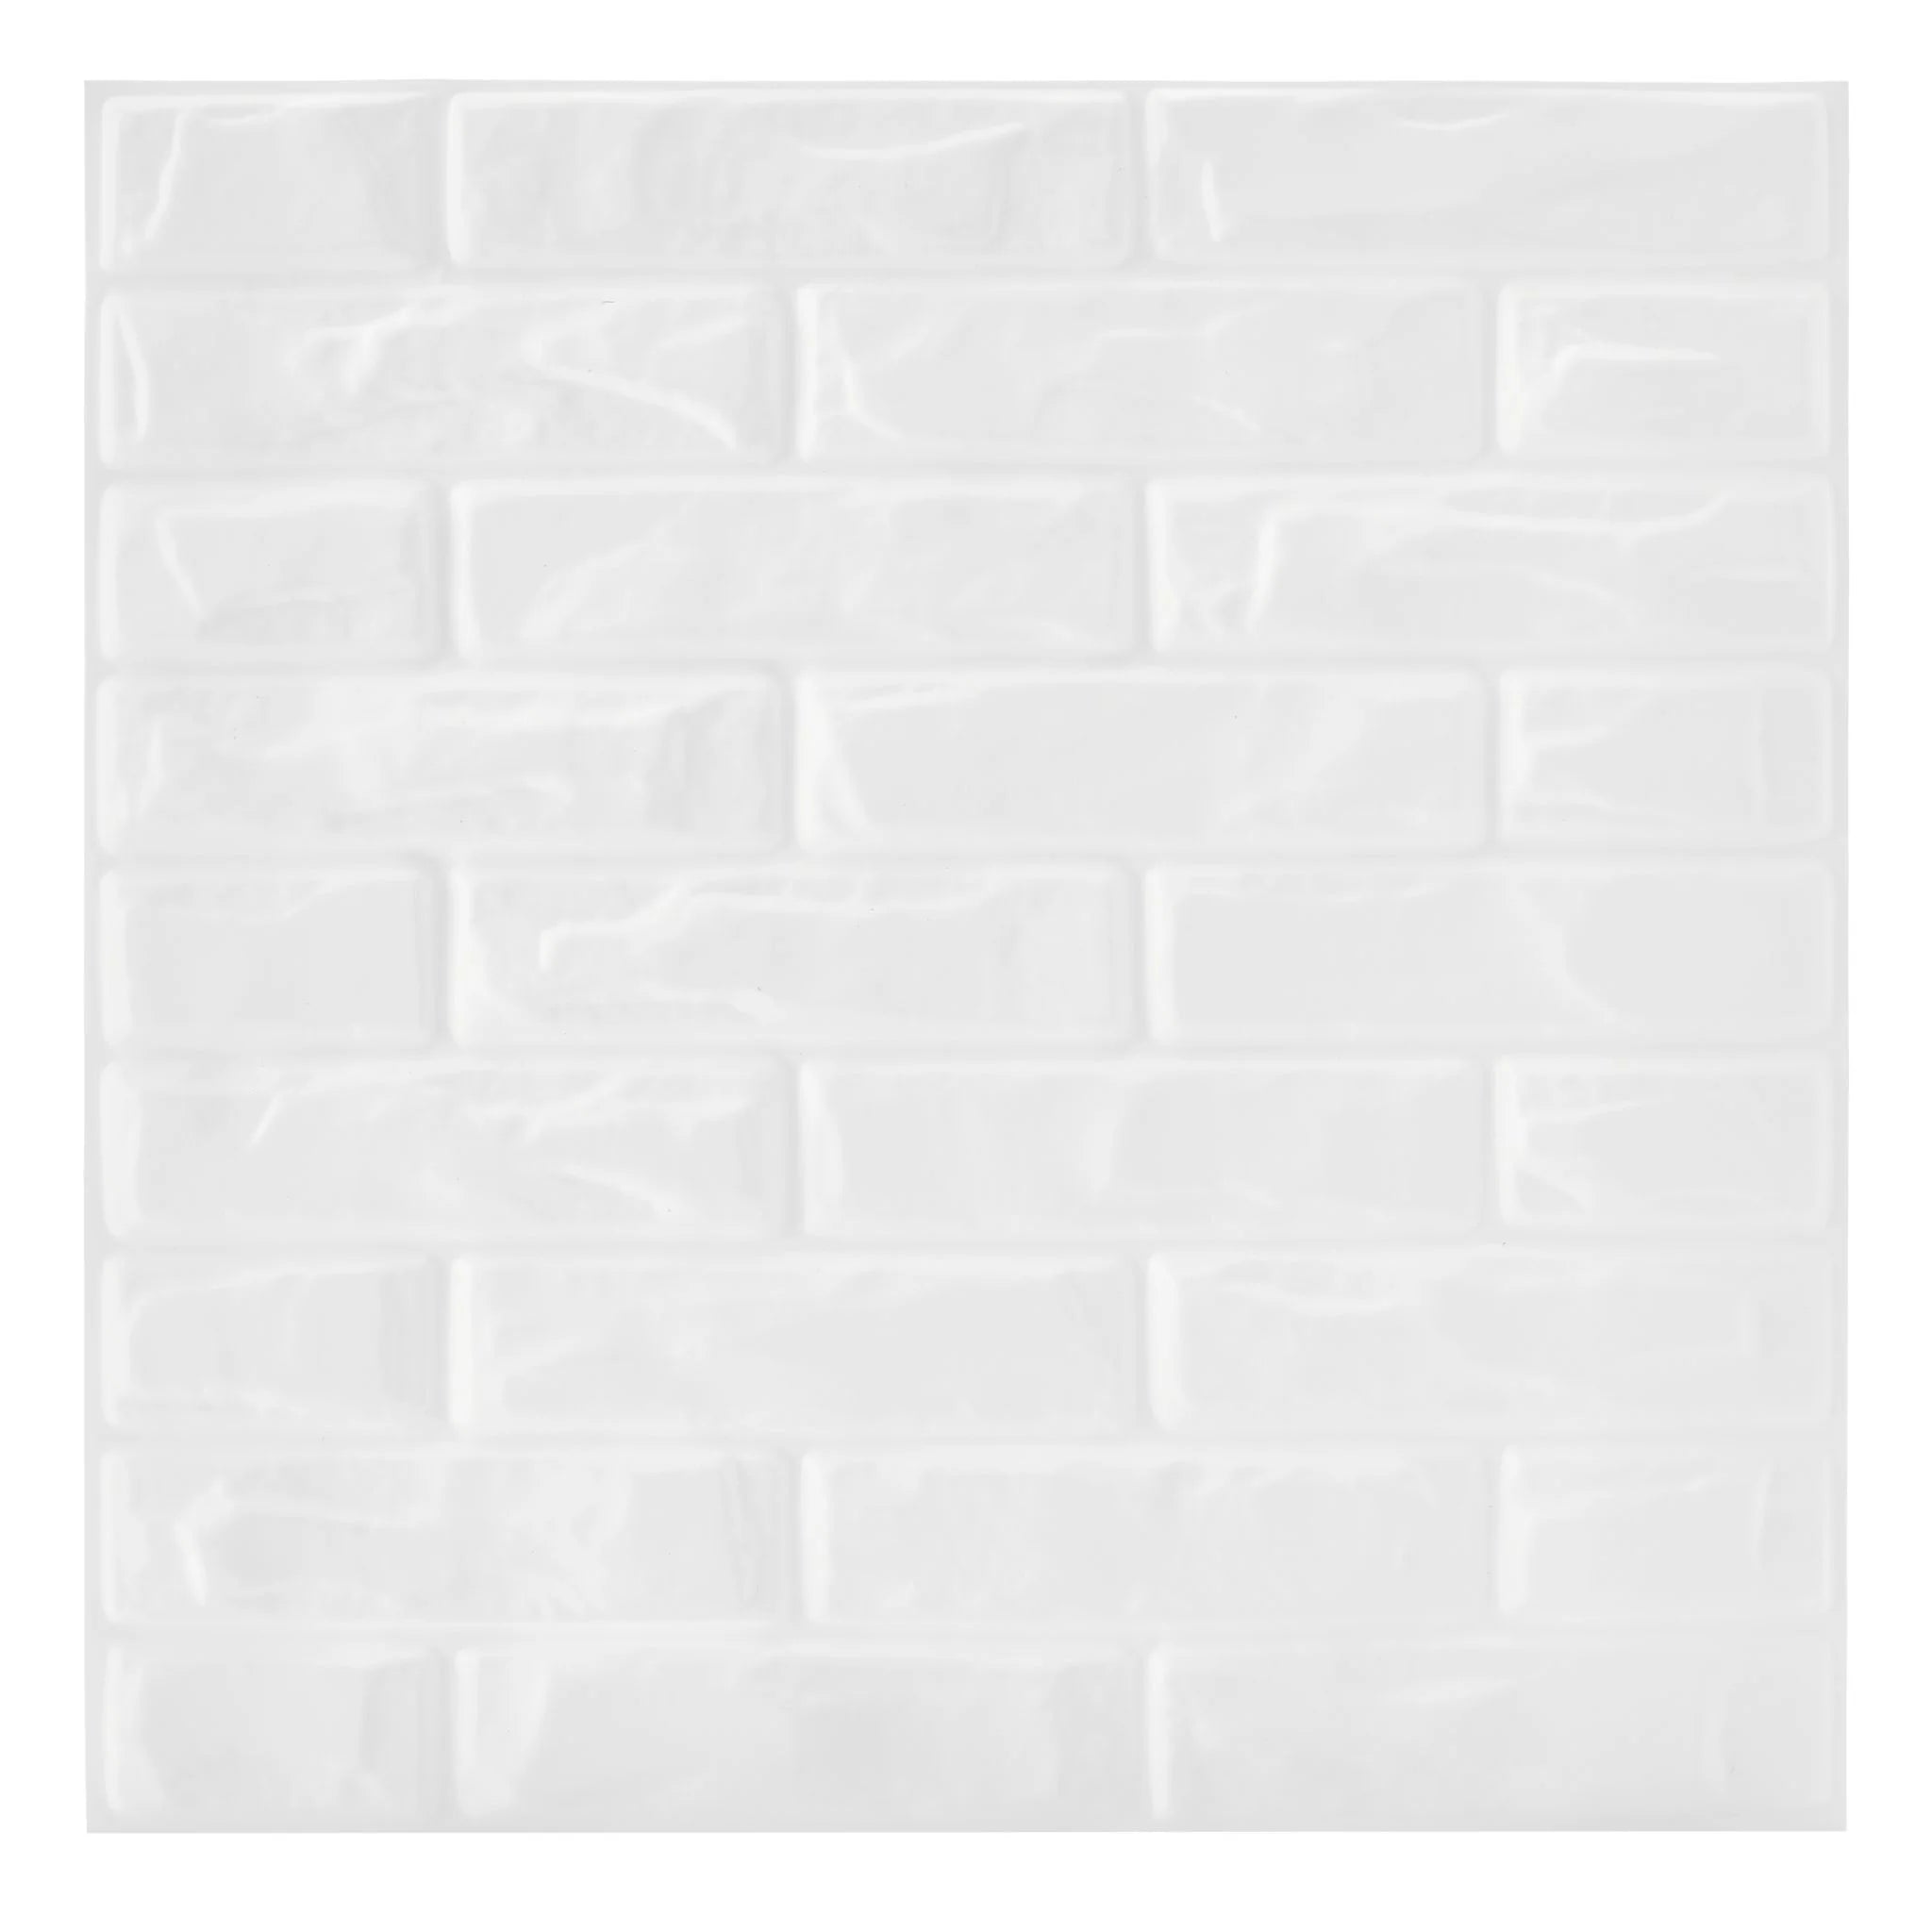 White PVC wall panel with brick patterns, close-up view